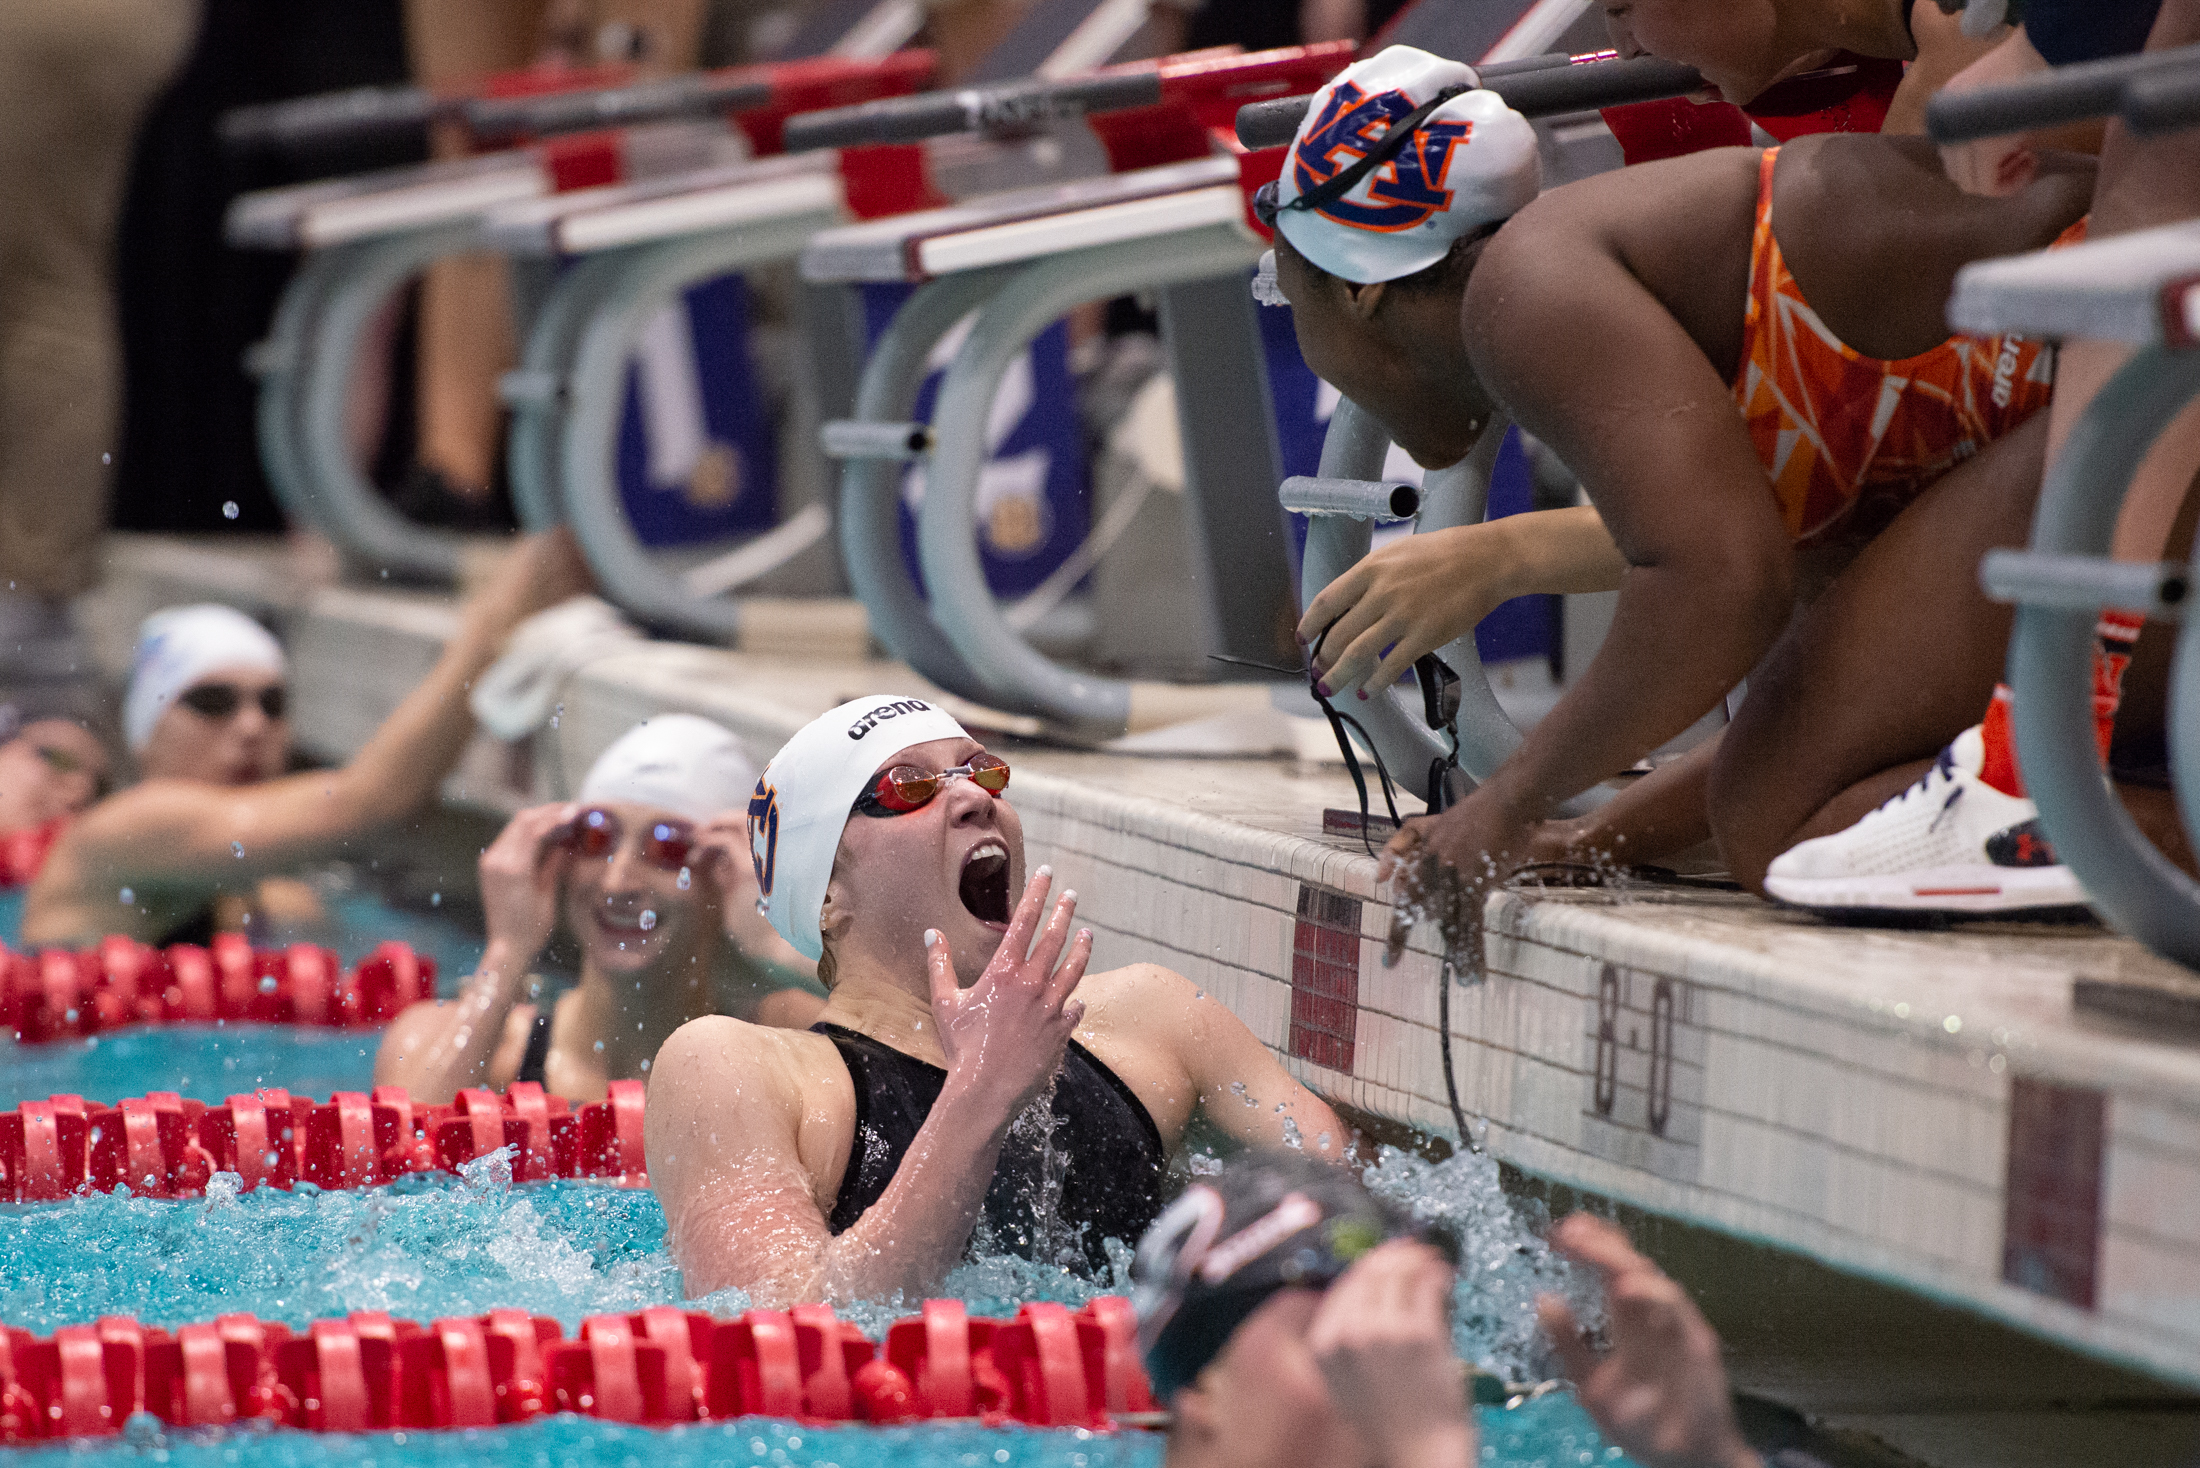  Erin Falconer of Auburn celebrates after winning the 200 yard freestyle relay during finals on the evening of Feb. 21, 2019 in the Gabirelsen Natatorium in Athens, Georgia. Courtney Harnish of Georgia placed third. (Photo/Julian Alexander) 